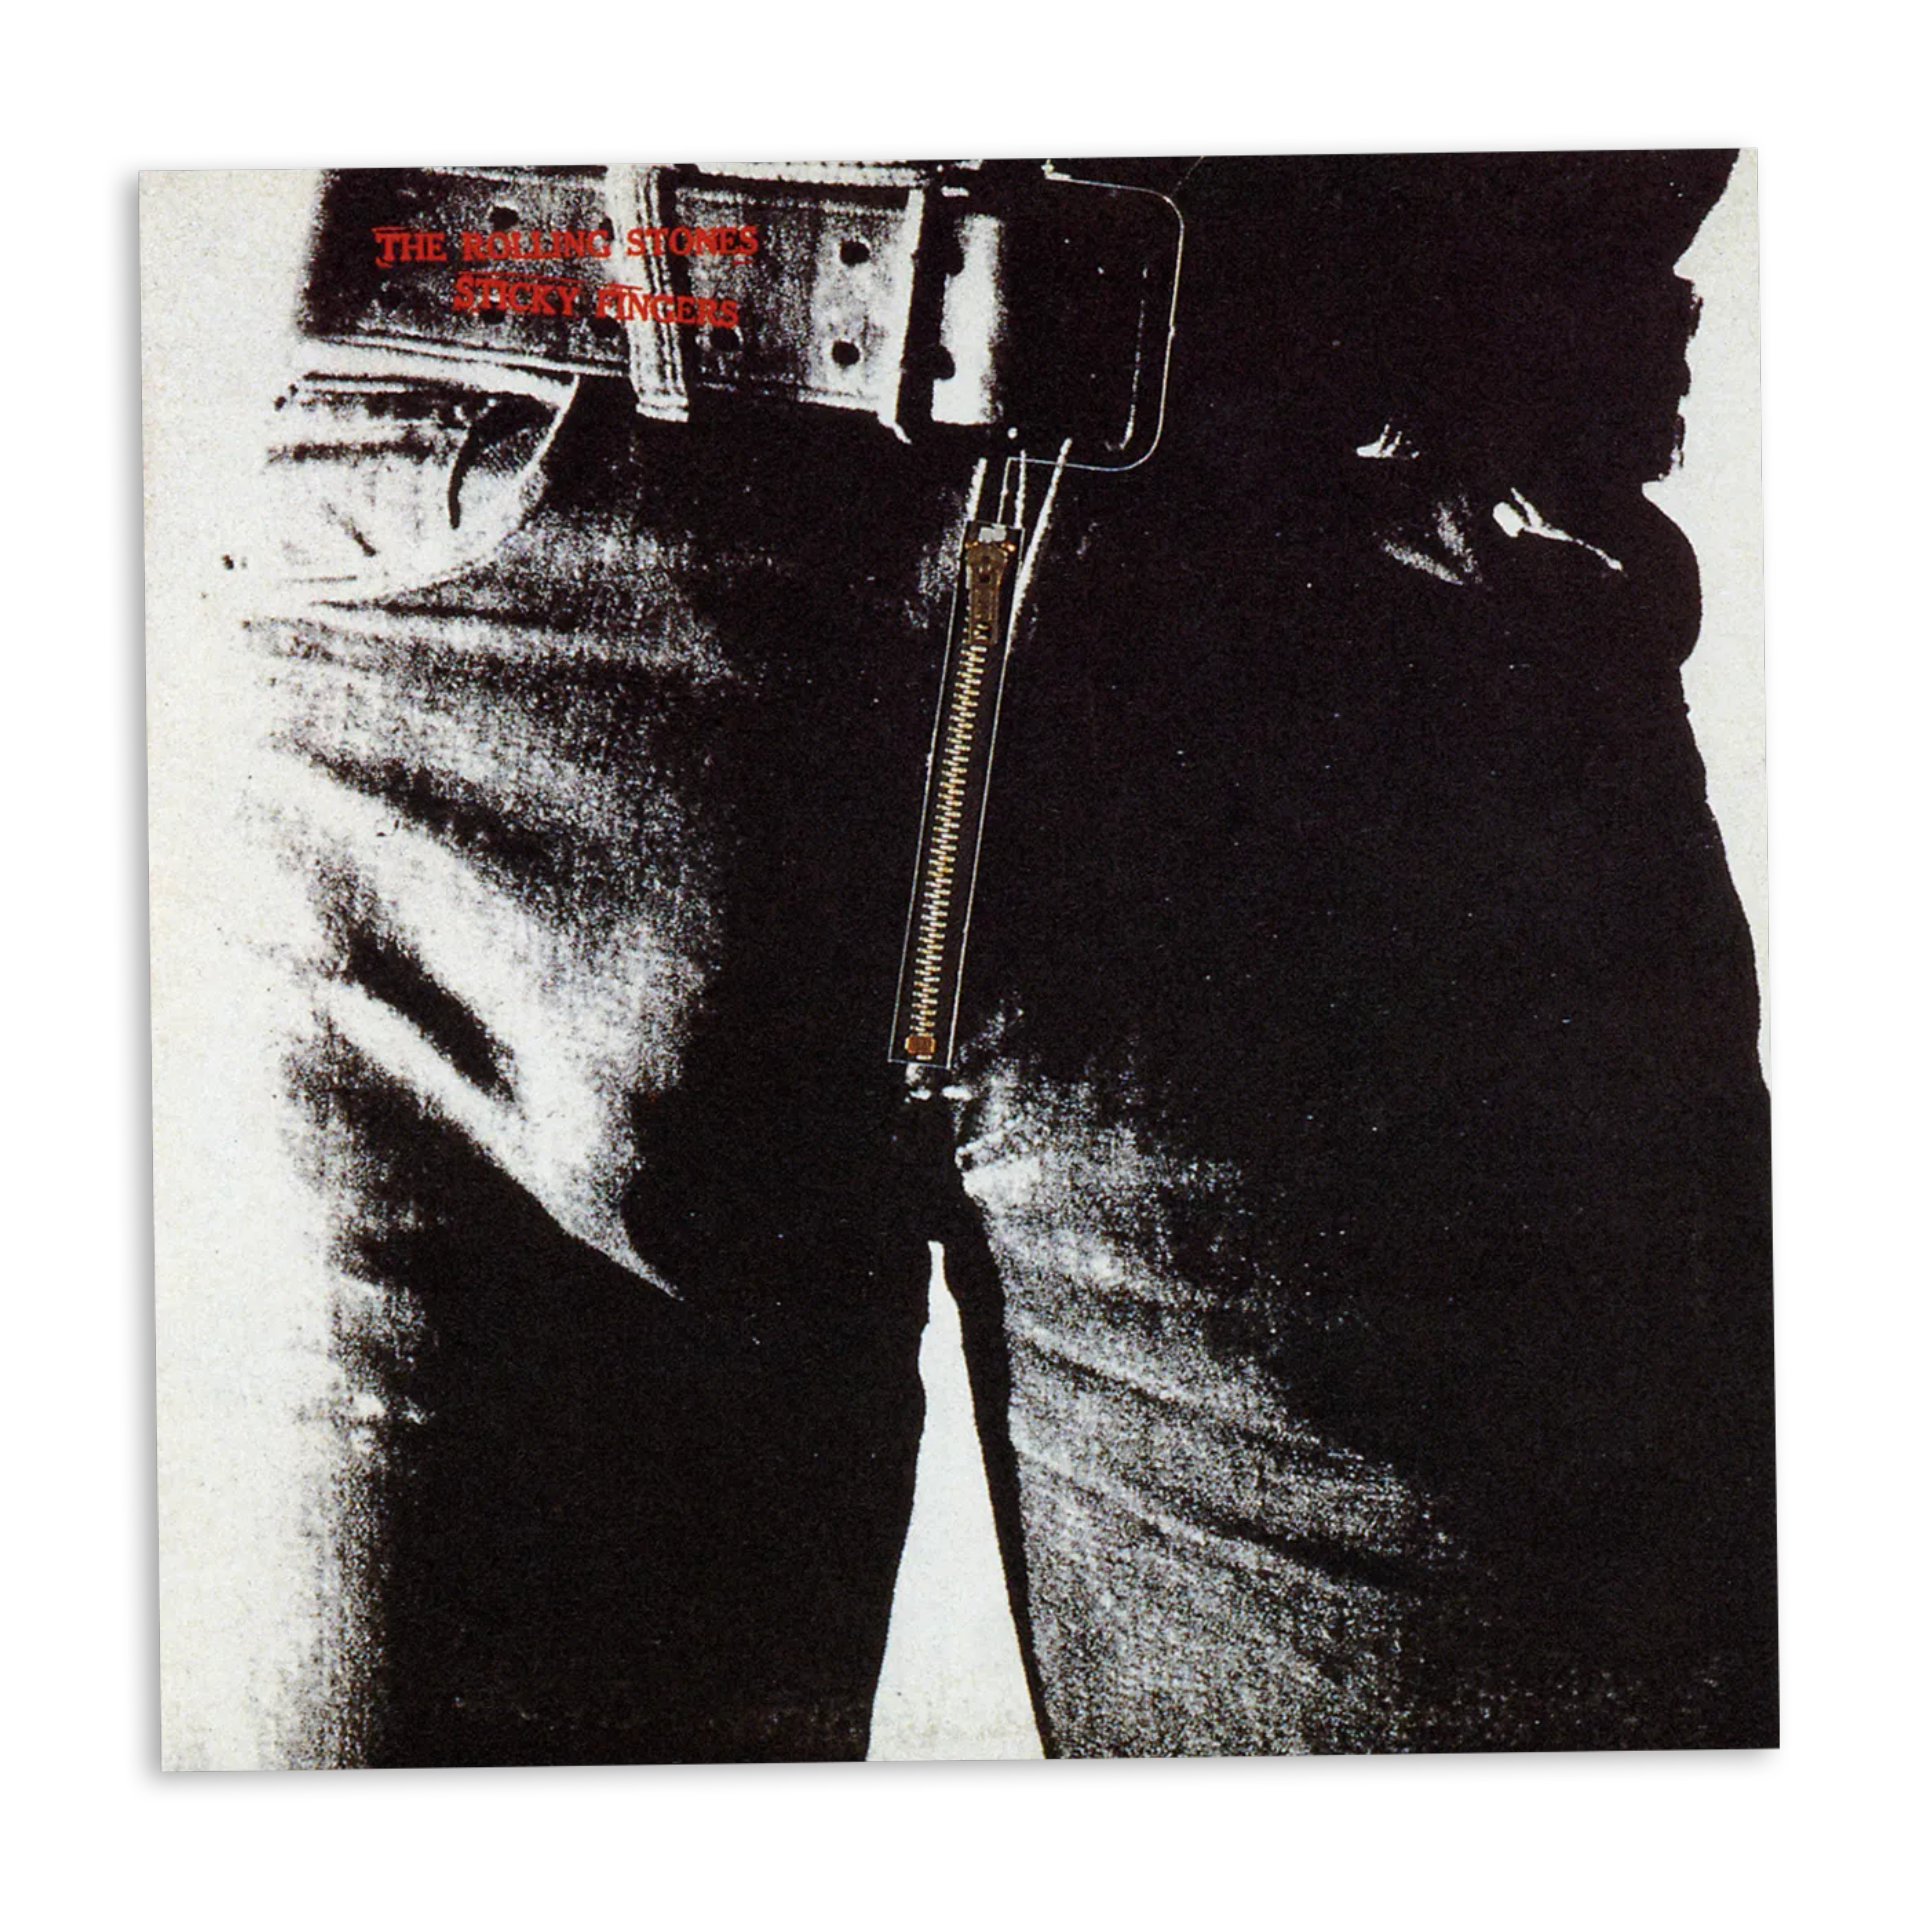 Album cover design by Andy Warhol for The Rolling Stones' album ‘Sticky Fingers’ in 1971, depicting a man's groin-area in jeans. The zipper of the jeans is a real, three-dimensional zipper, and the title of the album is written in red in the top left.